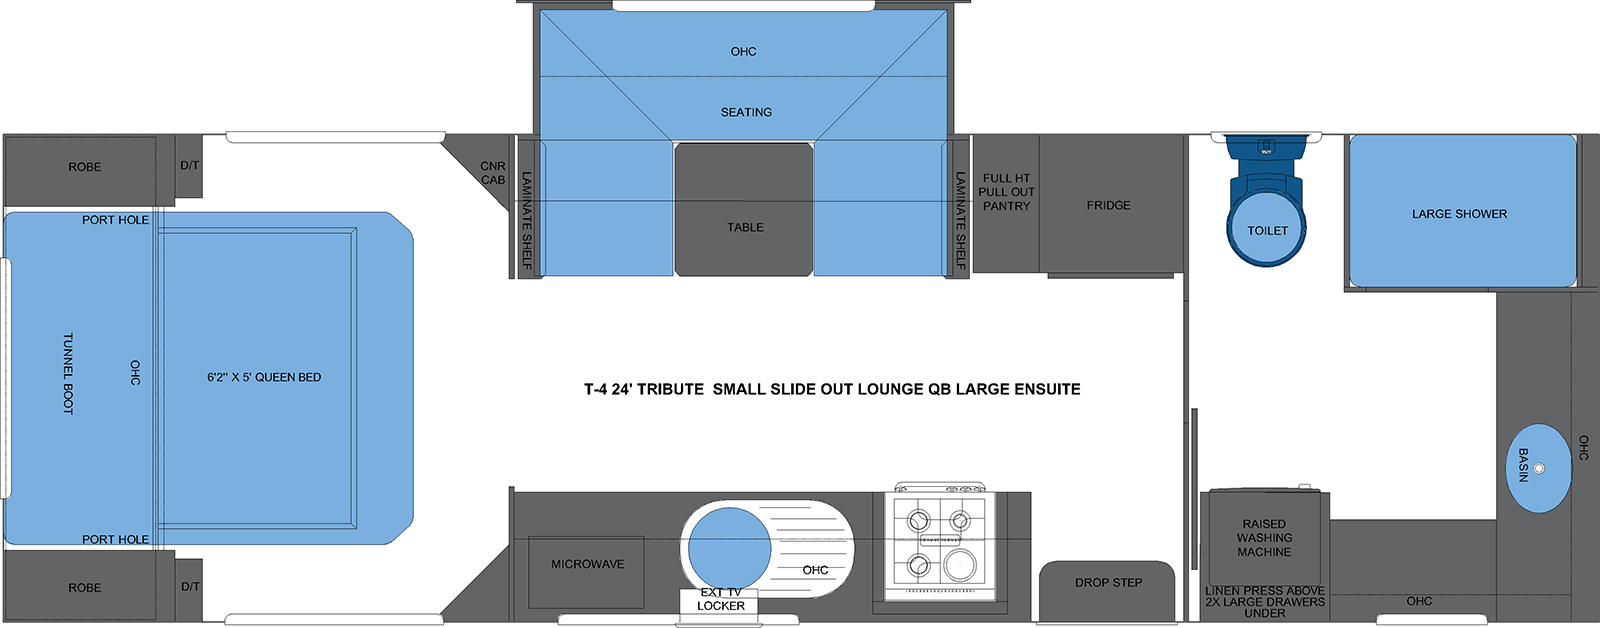 T-4 24' TRIBUTE SMALL SLIDE OUT LOUNGE QB LARGE ENSUITE